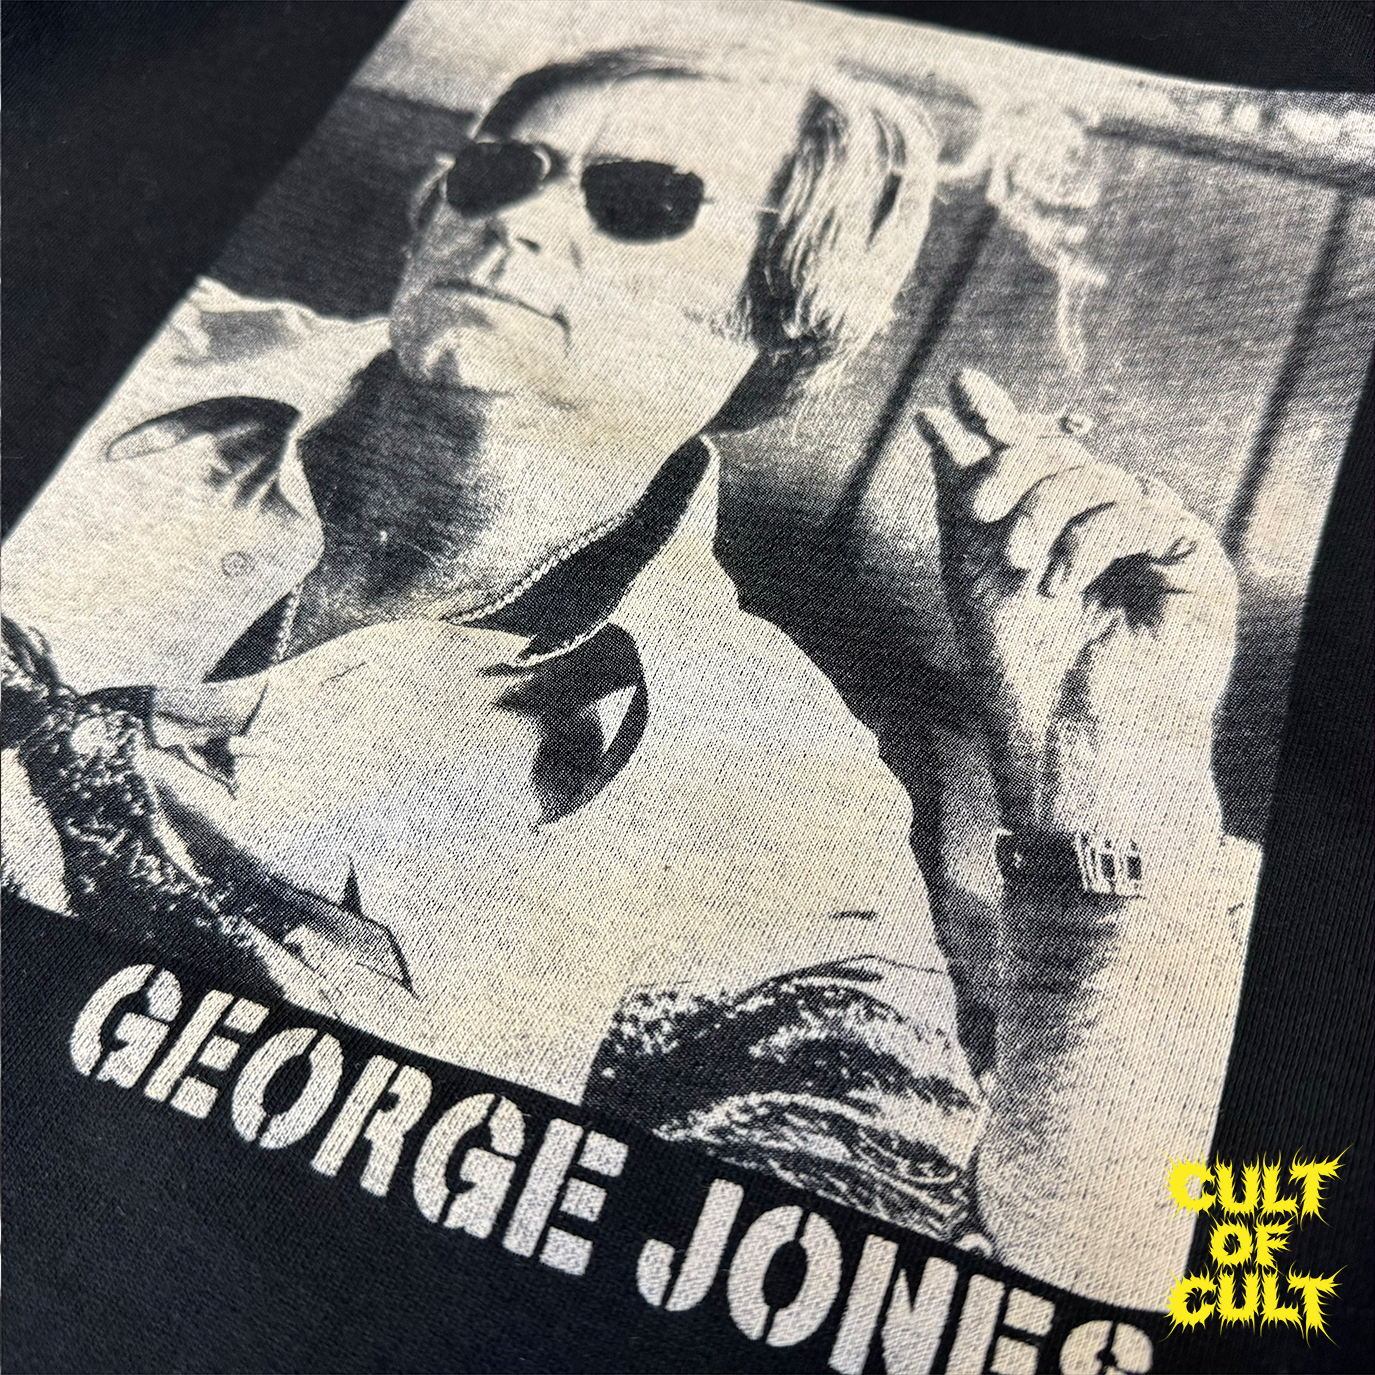 A detailed image of the photo of George Jones that is on the back of the hoodie